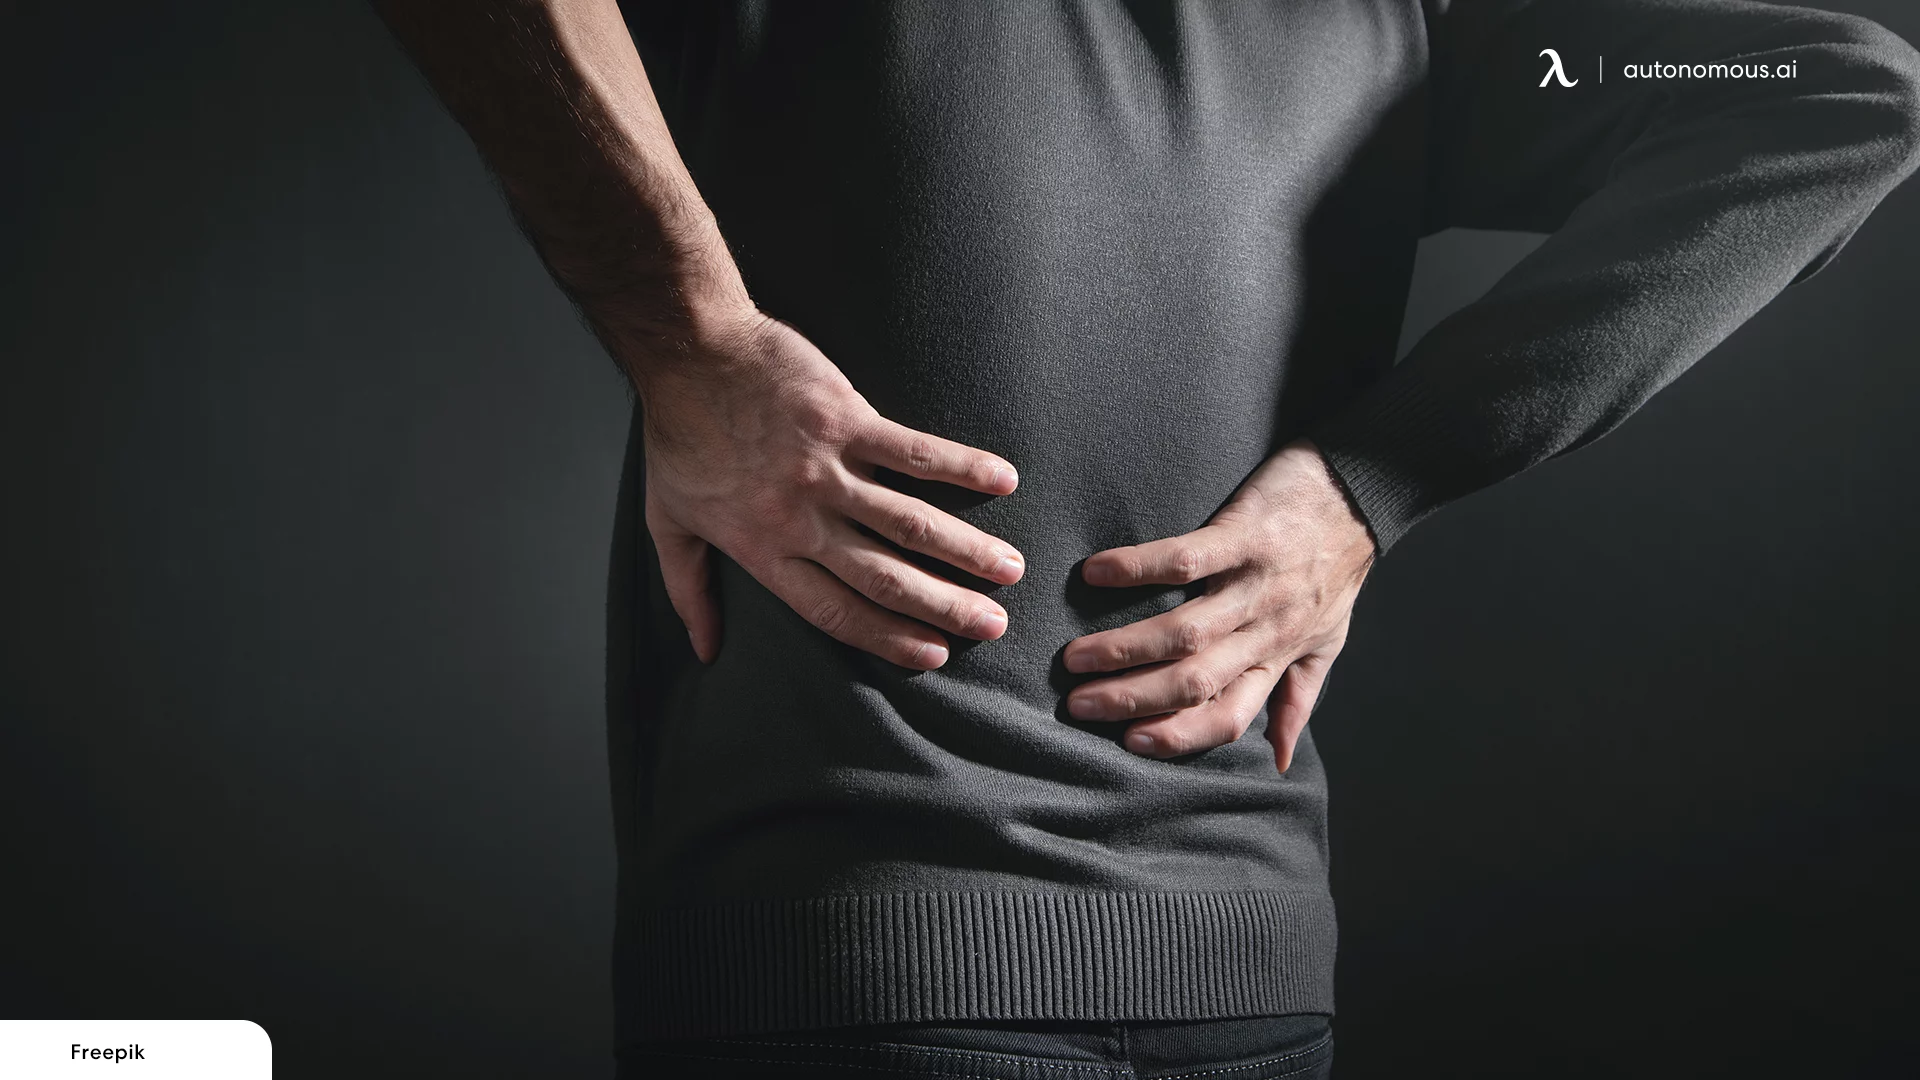 Some of the Chronic Back Pain Symptoms